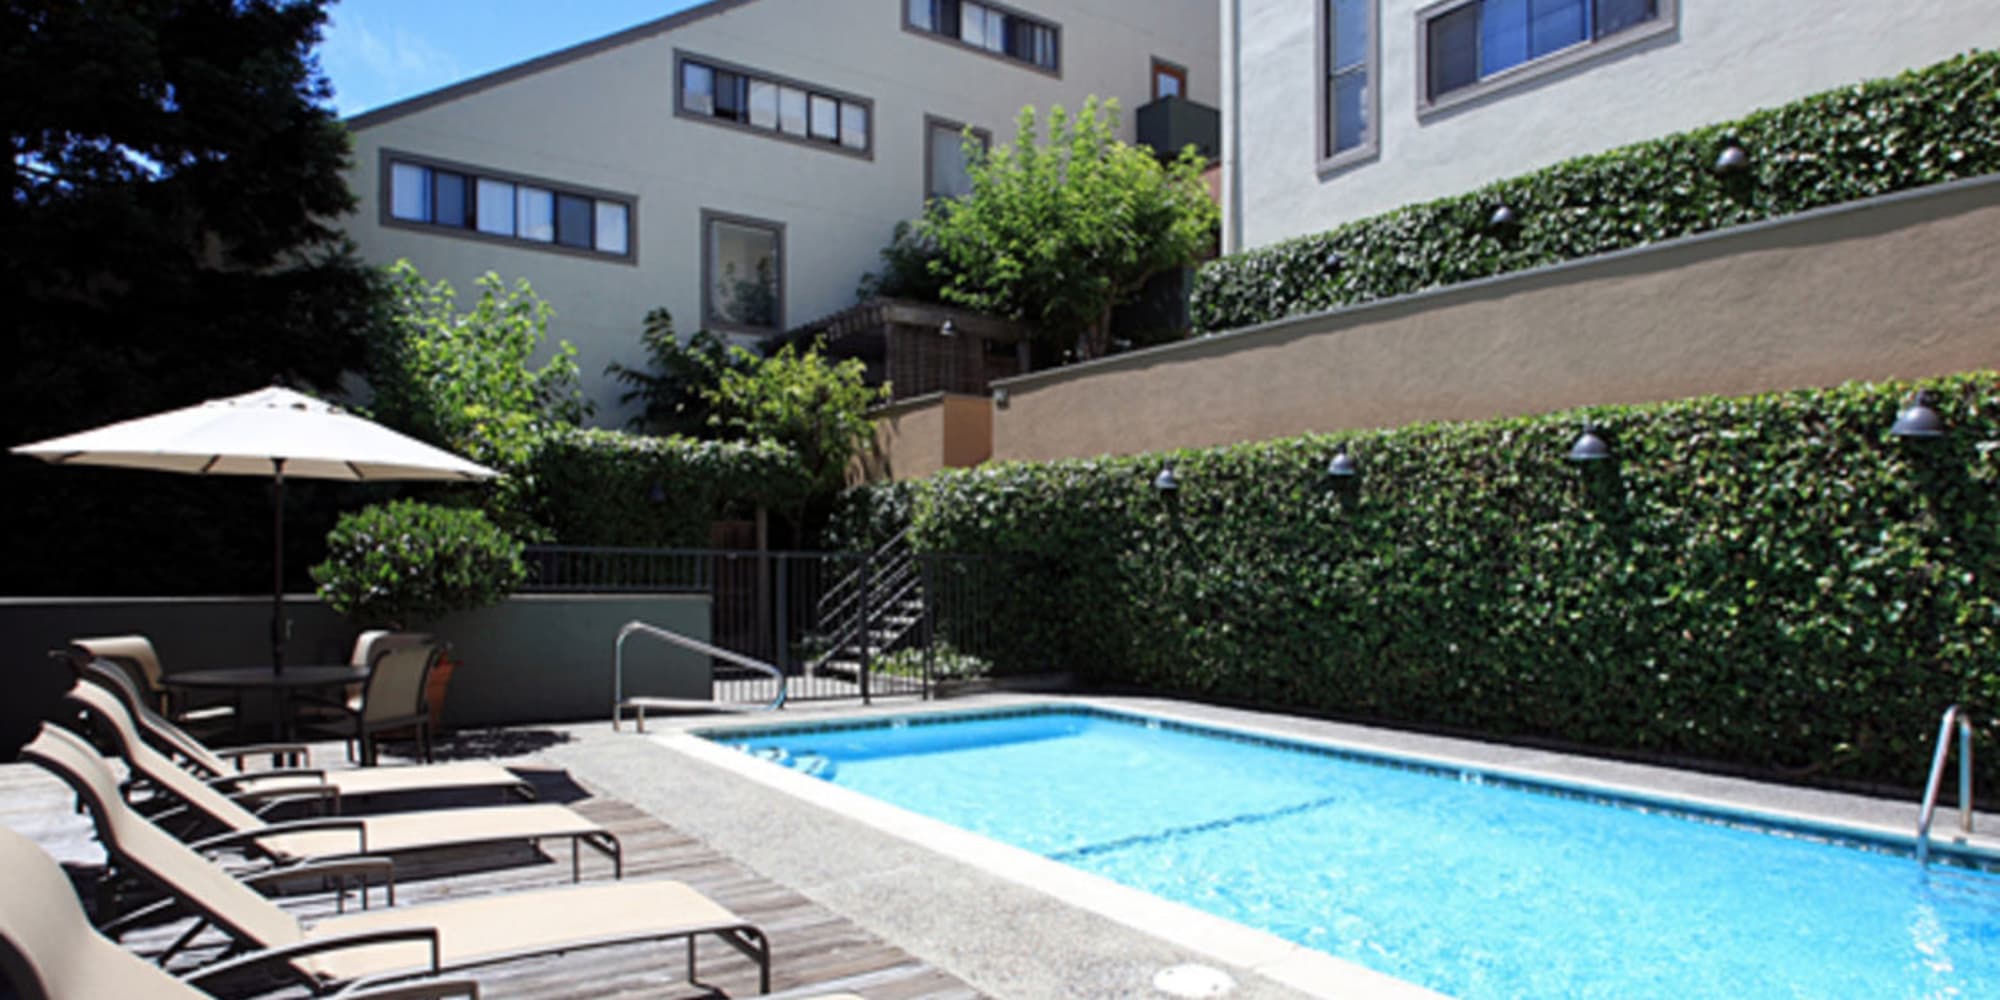 swimming pool at Woodmont Apartments in Belmont, California